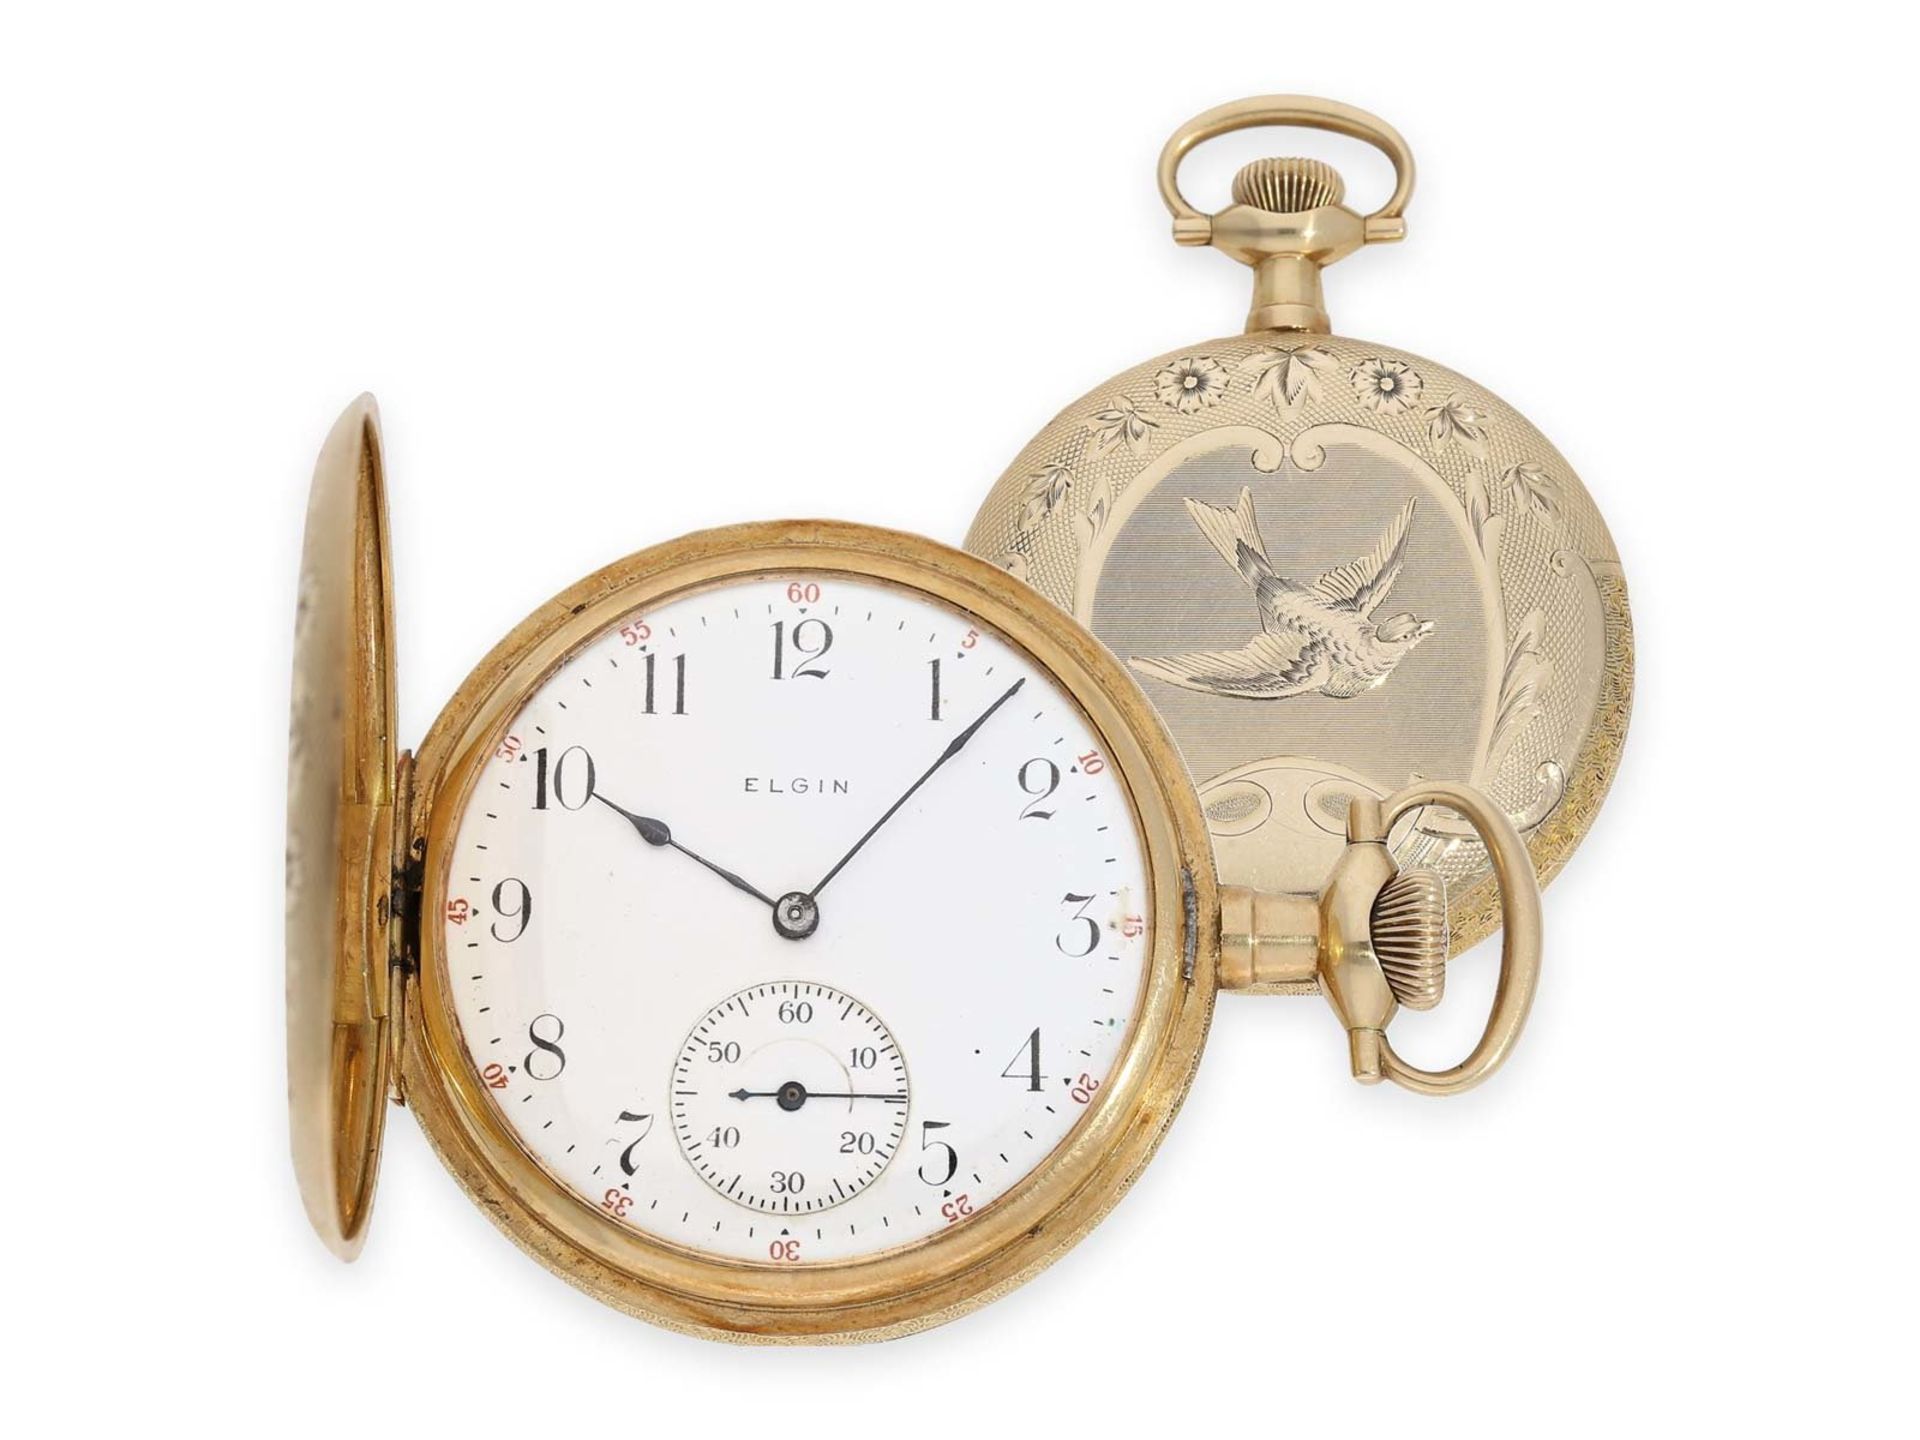 Pocket watch: very beautiful golden American Art Nouveau hunting case watch with extraordinary